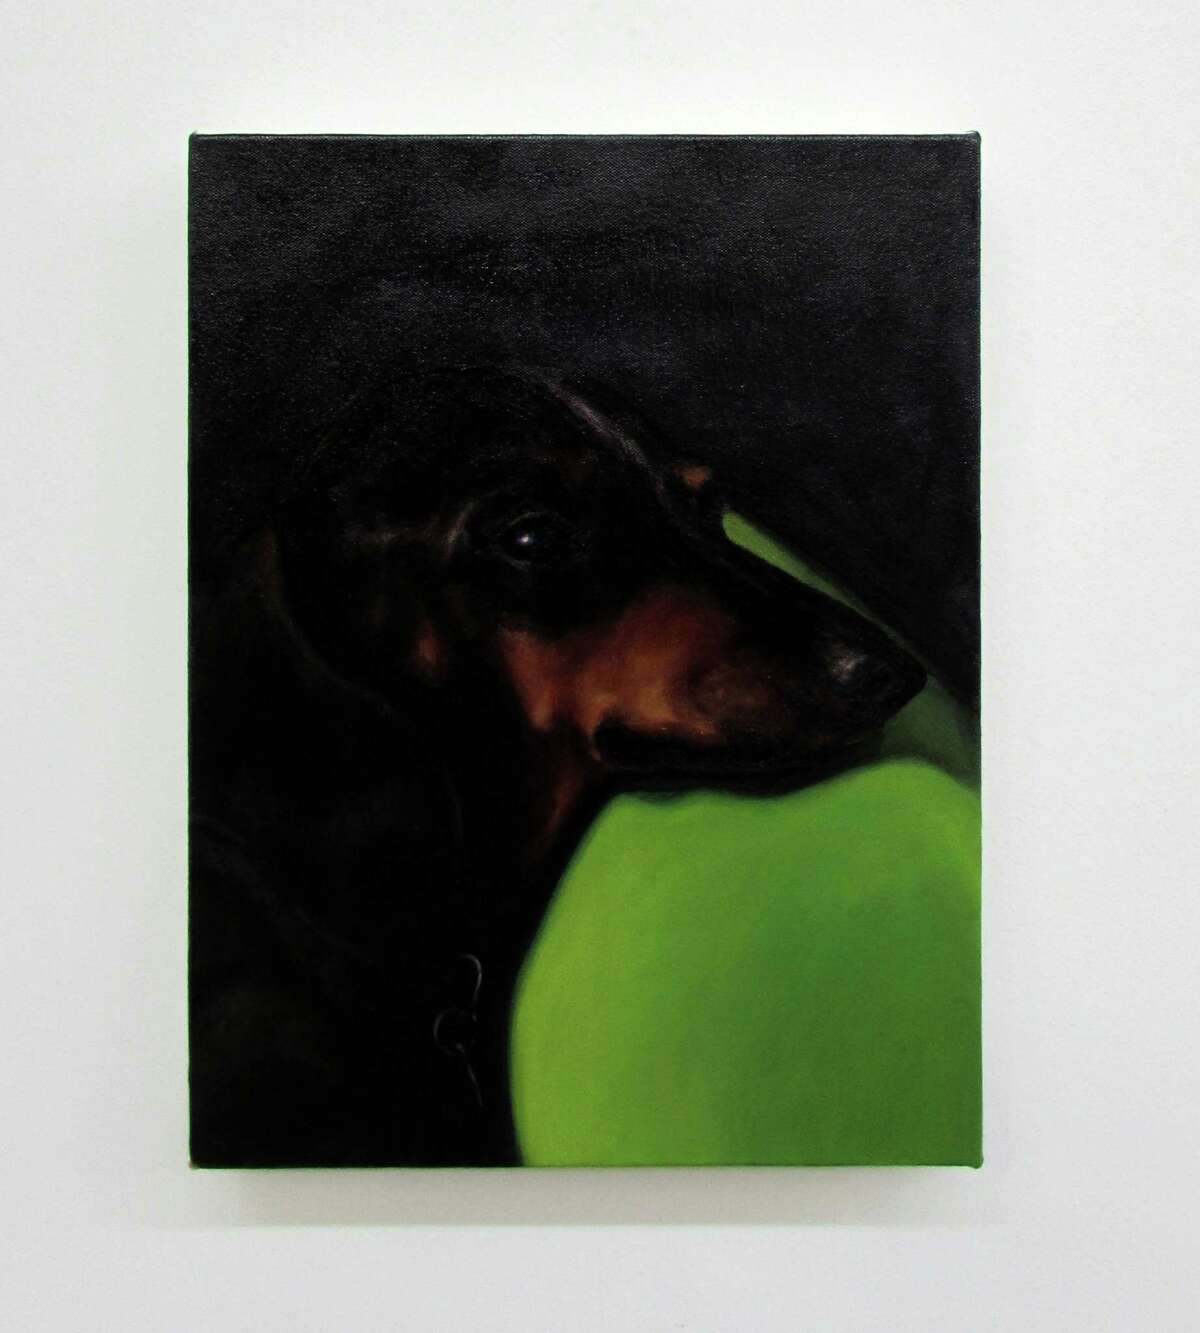 Raychael Stine's "Berthilde" echoes classical dog portraiture, a contrast to other works in the exhibit."